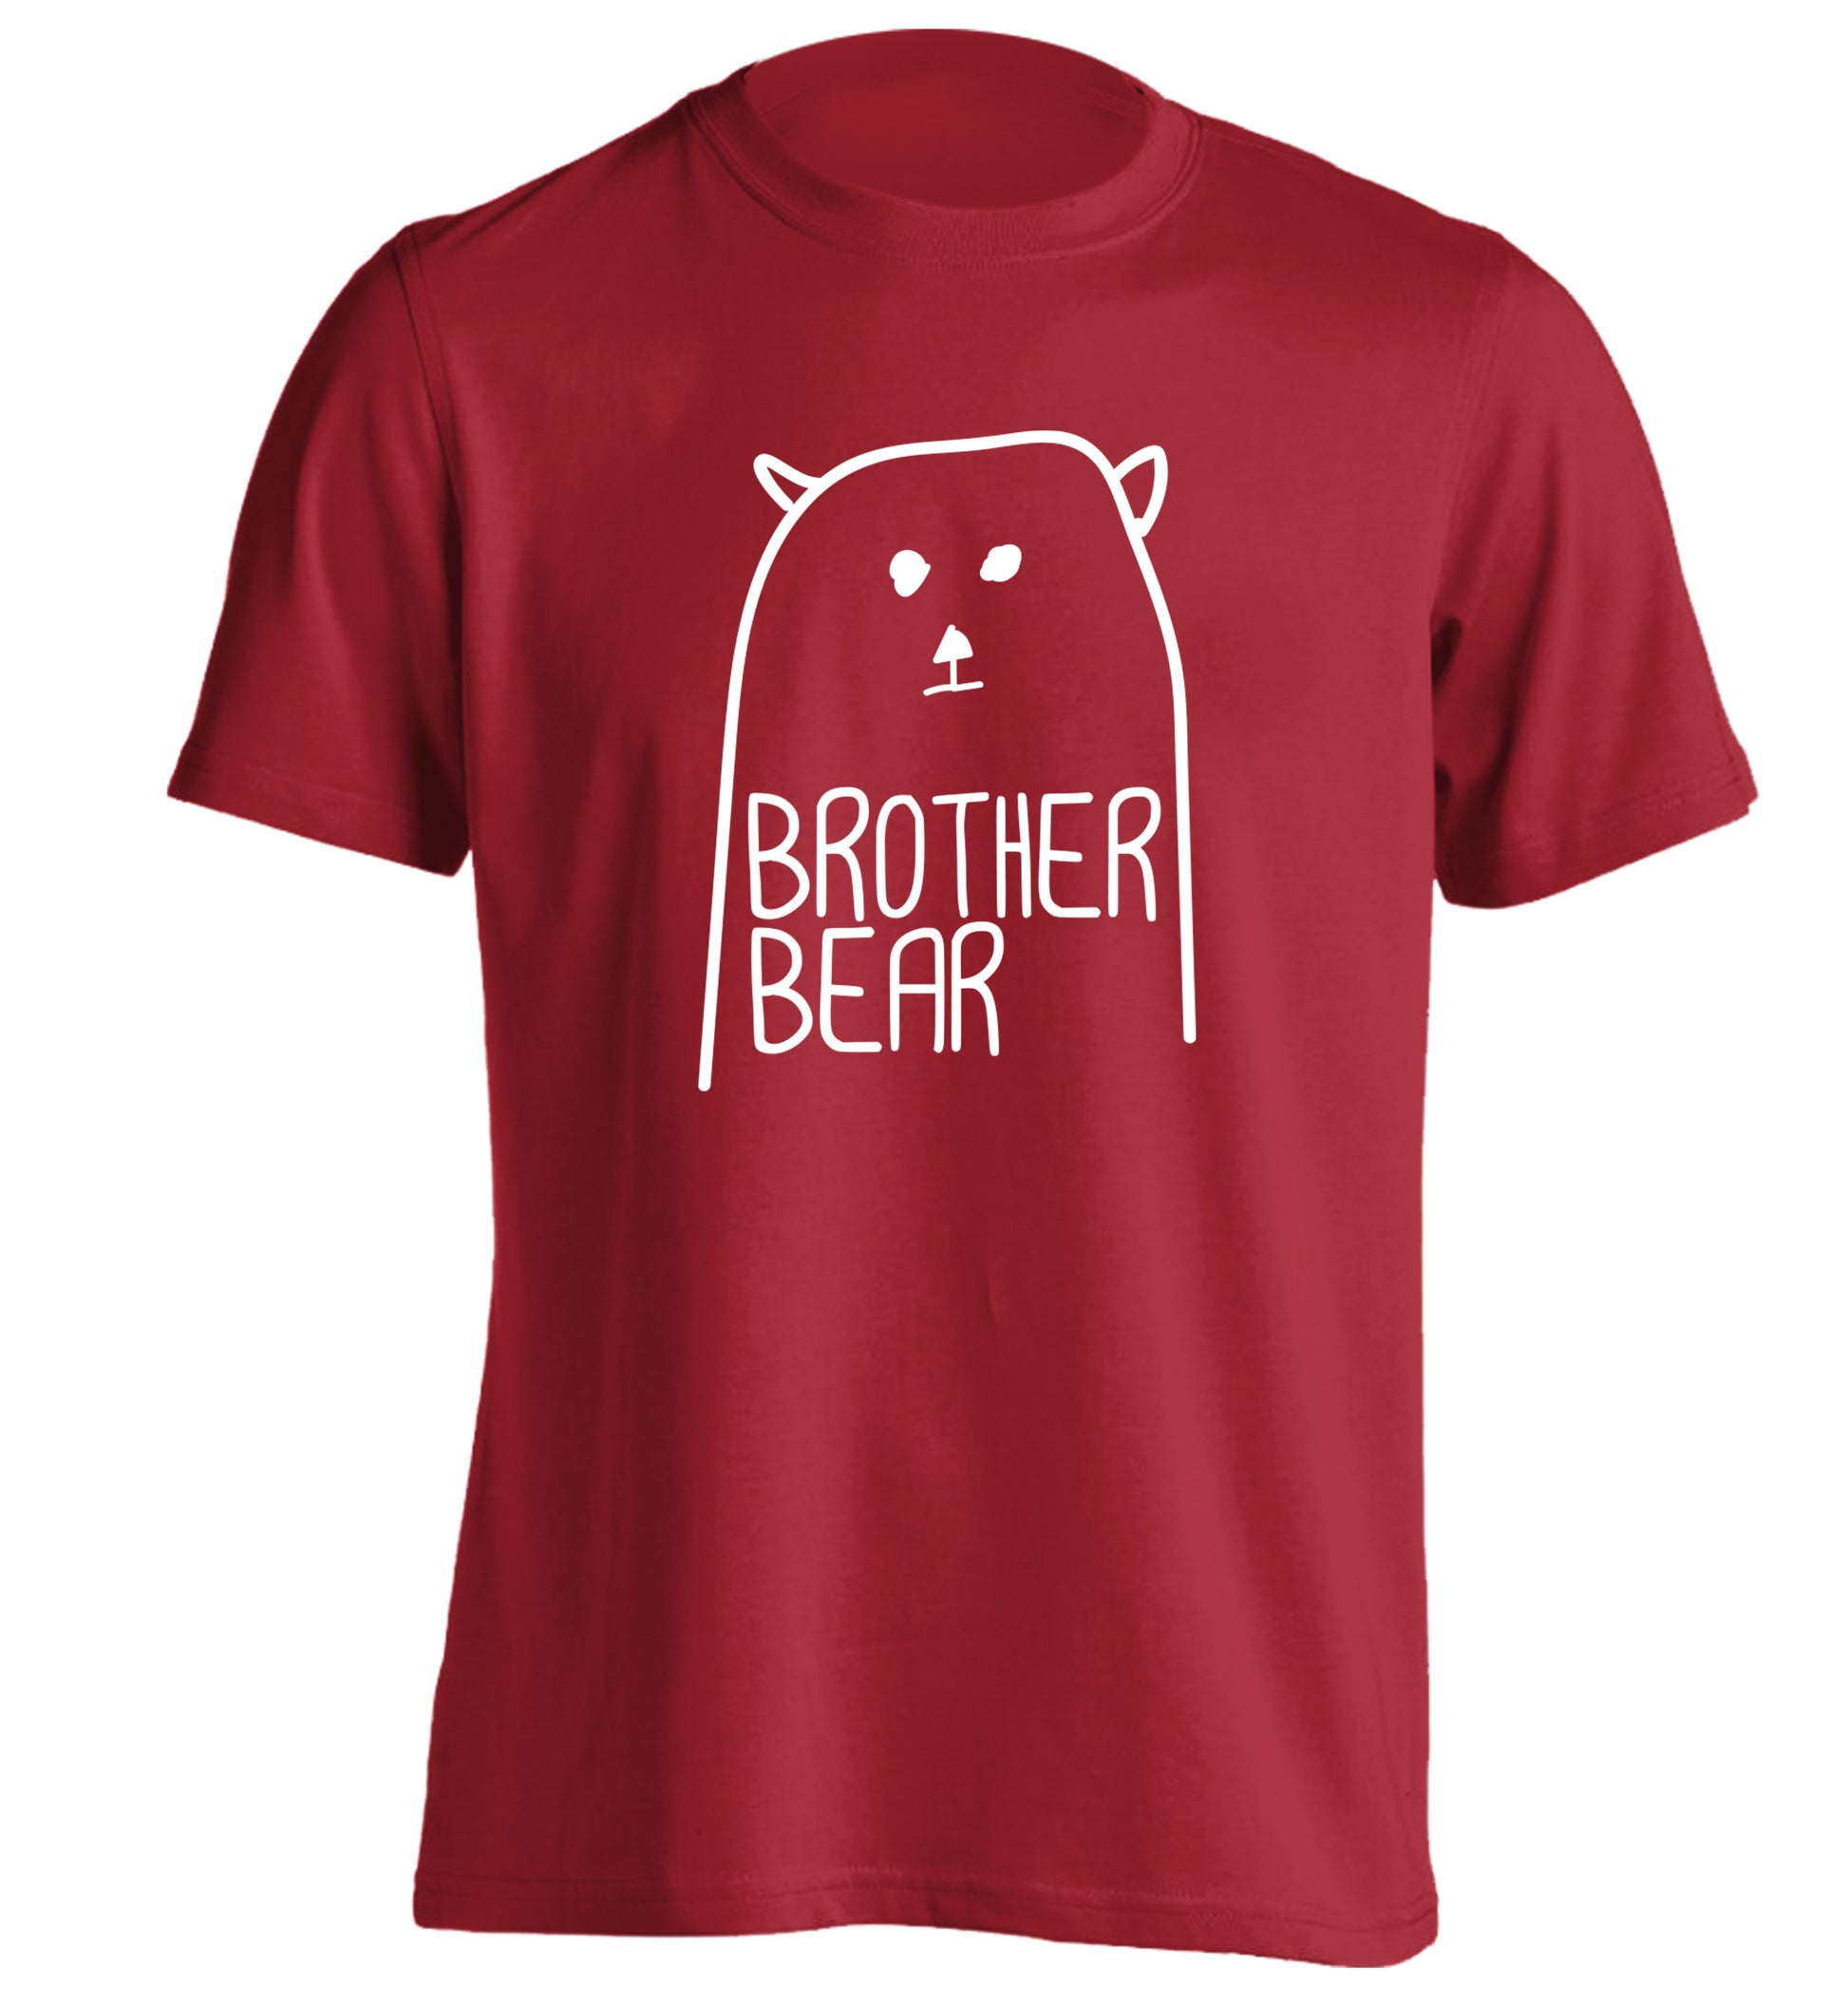 Brother bear adults unisex red Tshirt 2XL